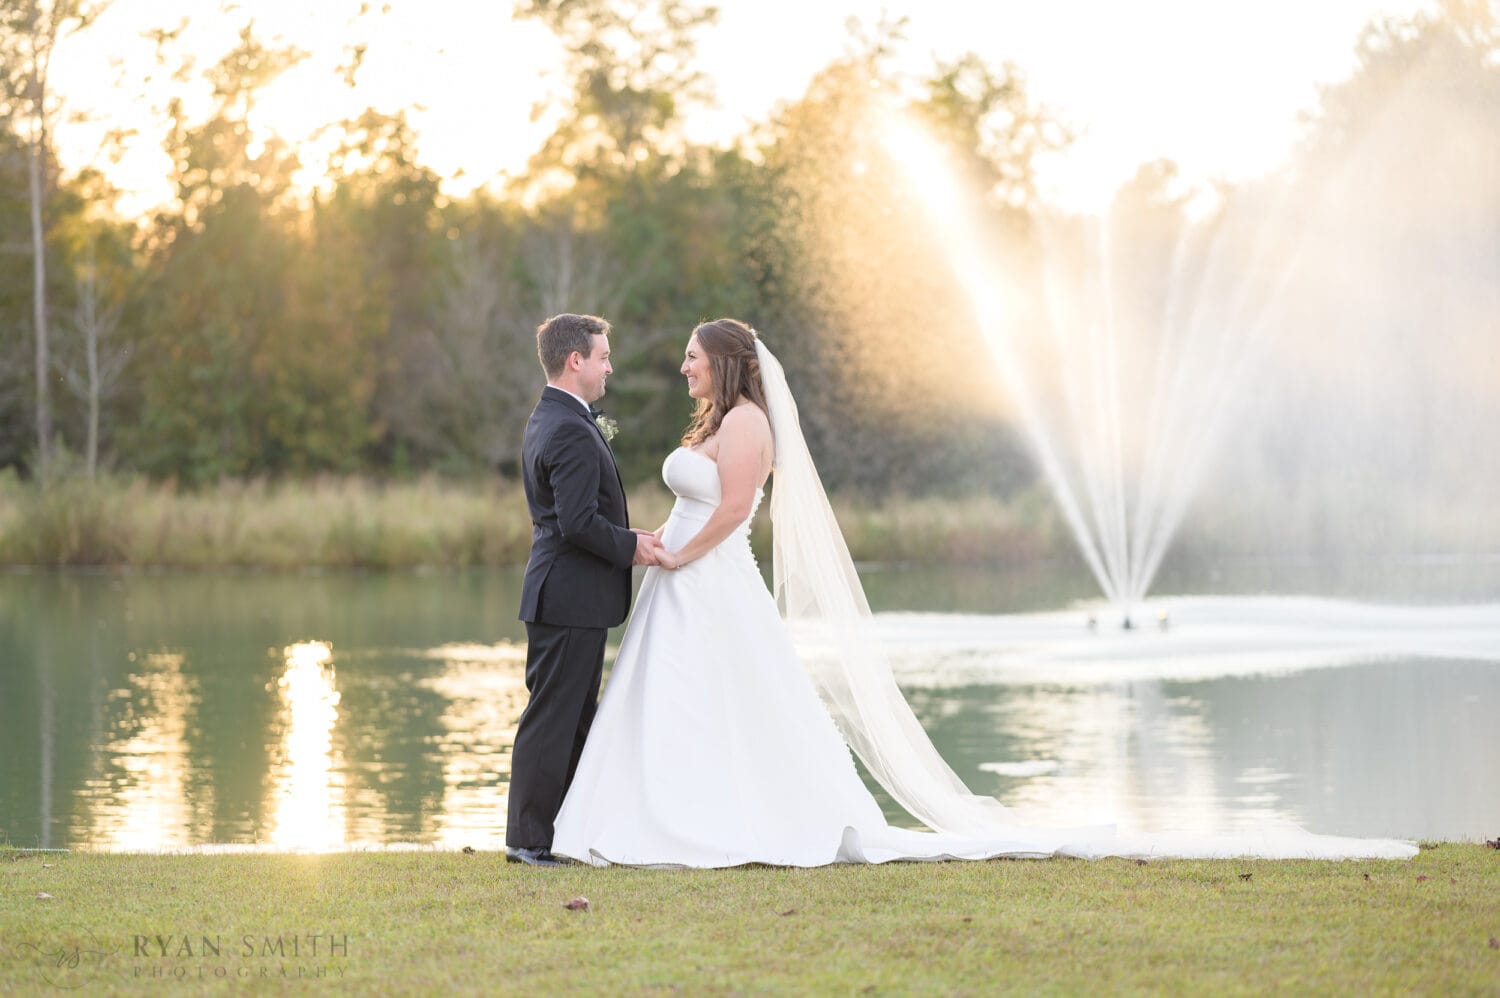 Holding hands in the sunset - The Venue at White Oaks Farm